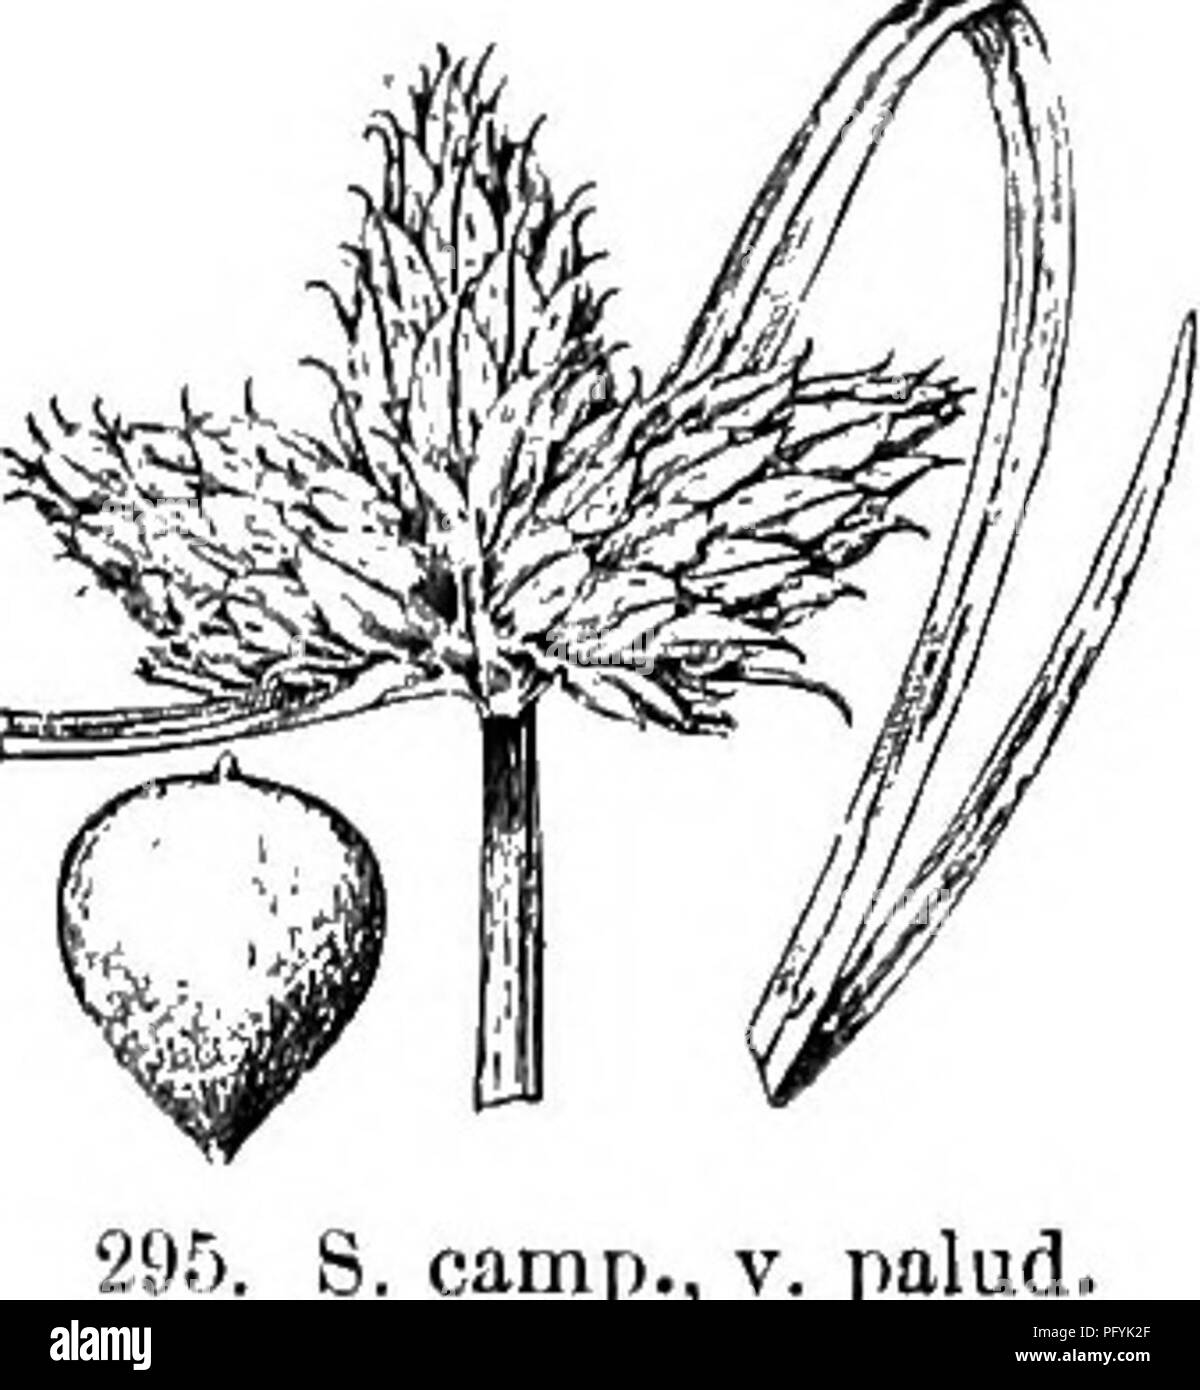 . Gray's new manual of botany. A handbook of the flowering plants and ferns of the central and northeastern United States and adjacent Canada. Botany. CYPERACEAE (SEDGE FAMILY) 193. palud. N. Y. Passing to Var. 1-2 cm. long, on mostly fays ; scales all pubescent, the awns soon recurved and/many times exceeding the cleft tip ; achene broadly to narrowly obovoid, compressed, flat on one side, convex or obtuse-angled on the other, short-pointed, shining ; the bristles unequal and deciduous or obsolete. {S. maritimus, in part. Am. authors.) — Brackish or salt marshes, Mass. to Fla. and Tex. July-S Stock Photo